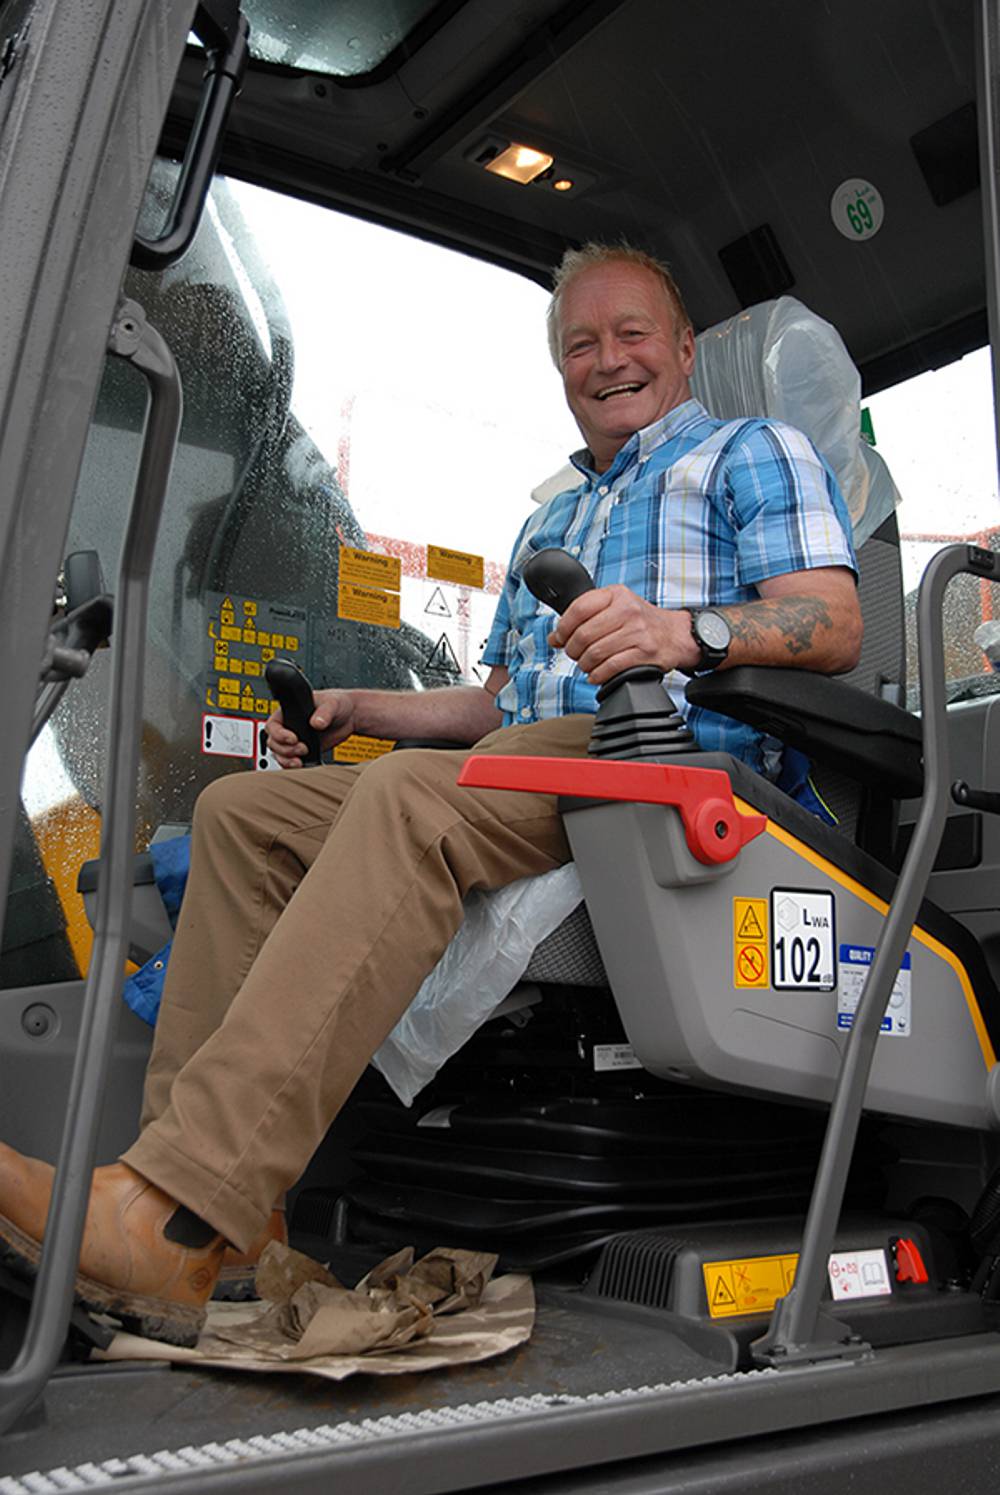 Plant Manager Brian Henderson impressed with the high level of operator comfort, the smoothness of control, quietness and overall performance and stability of the machine. 